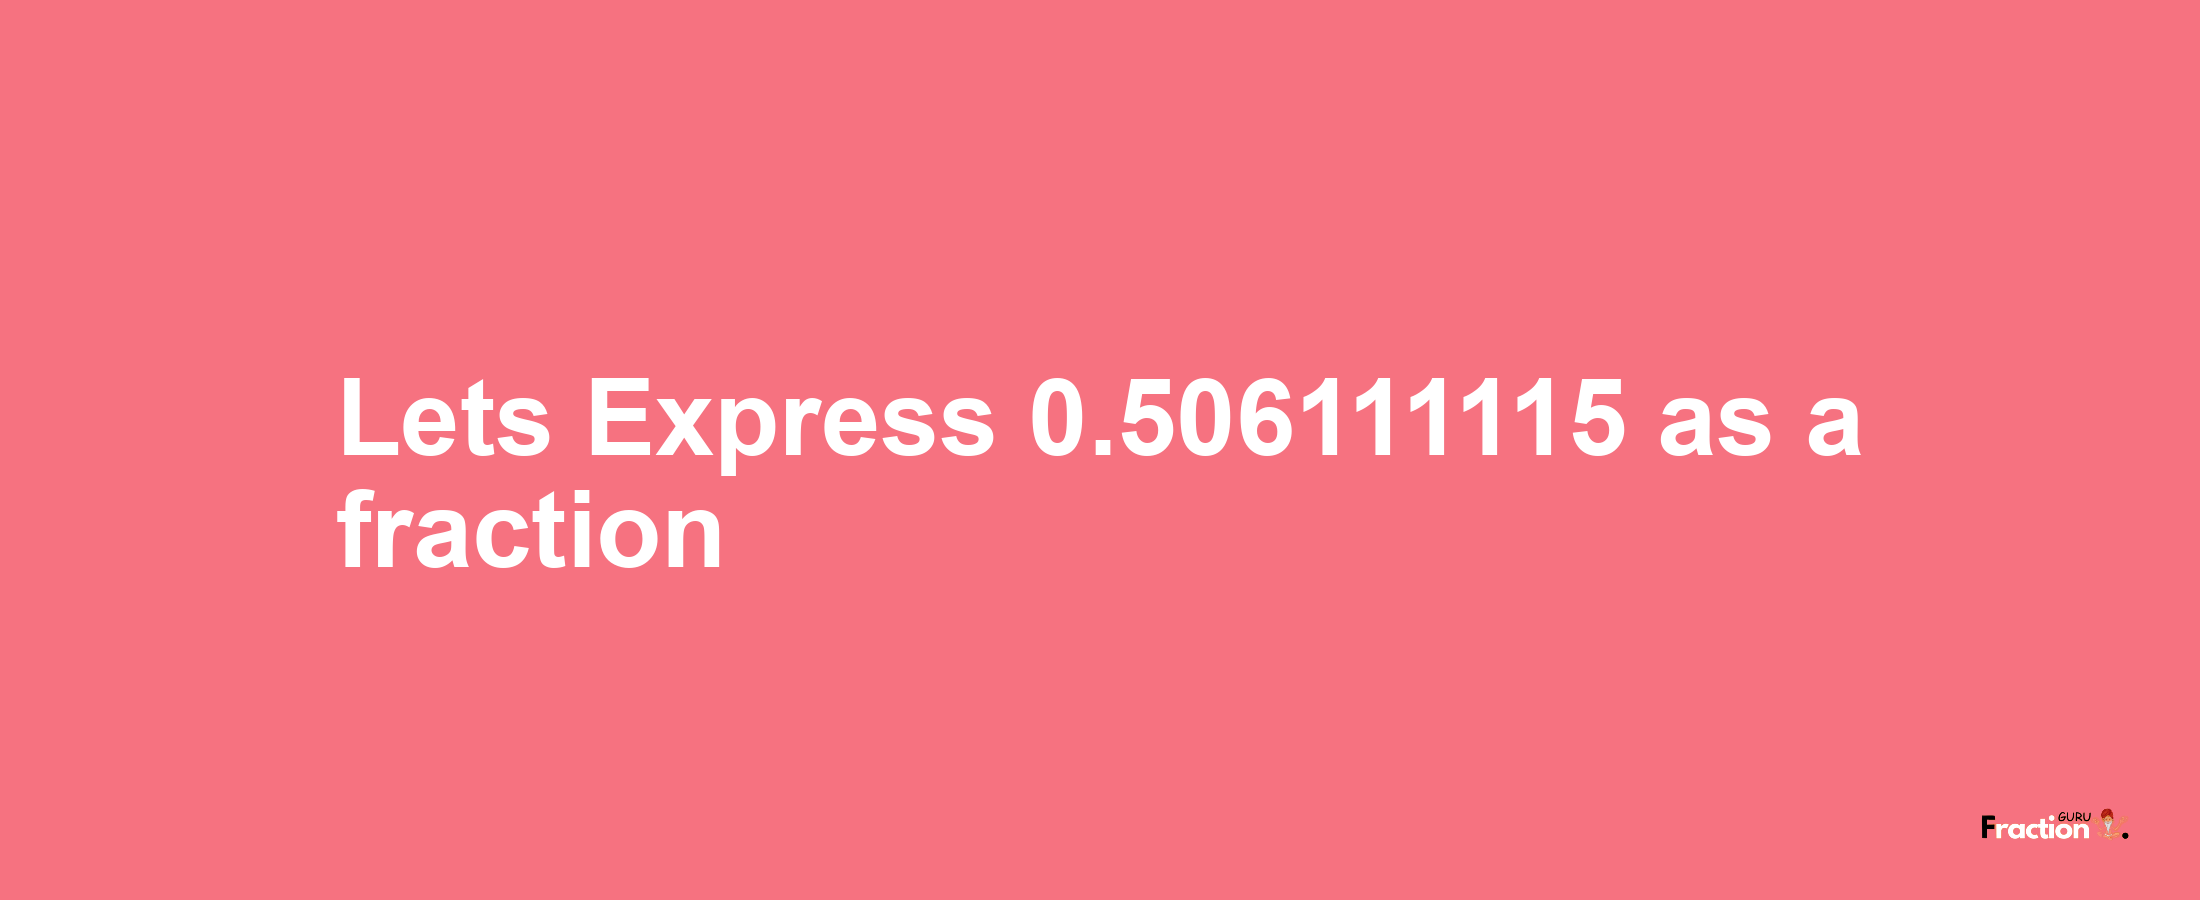 Lets Express 0.506111115 as afraction